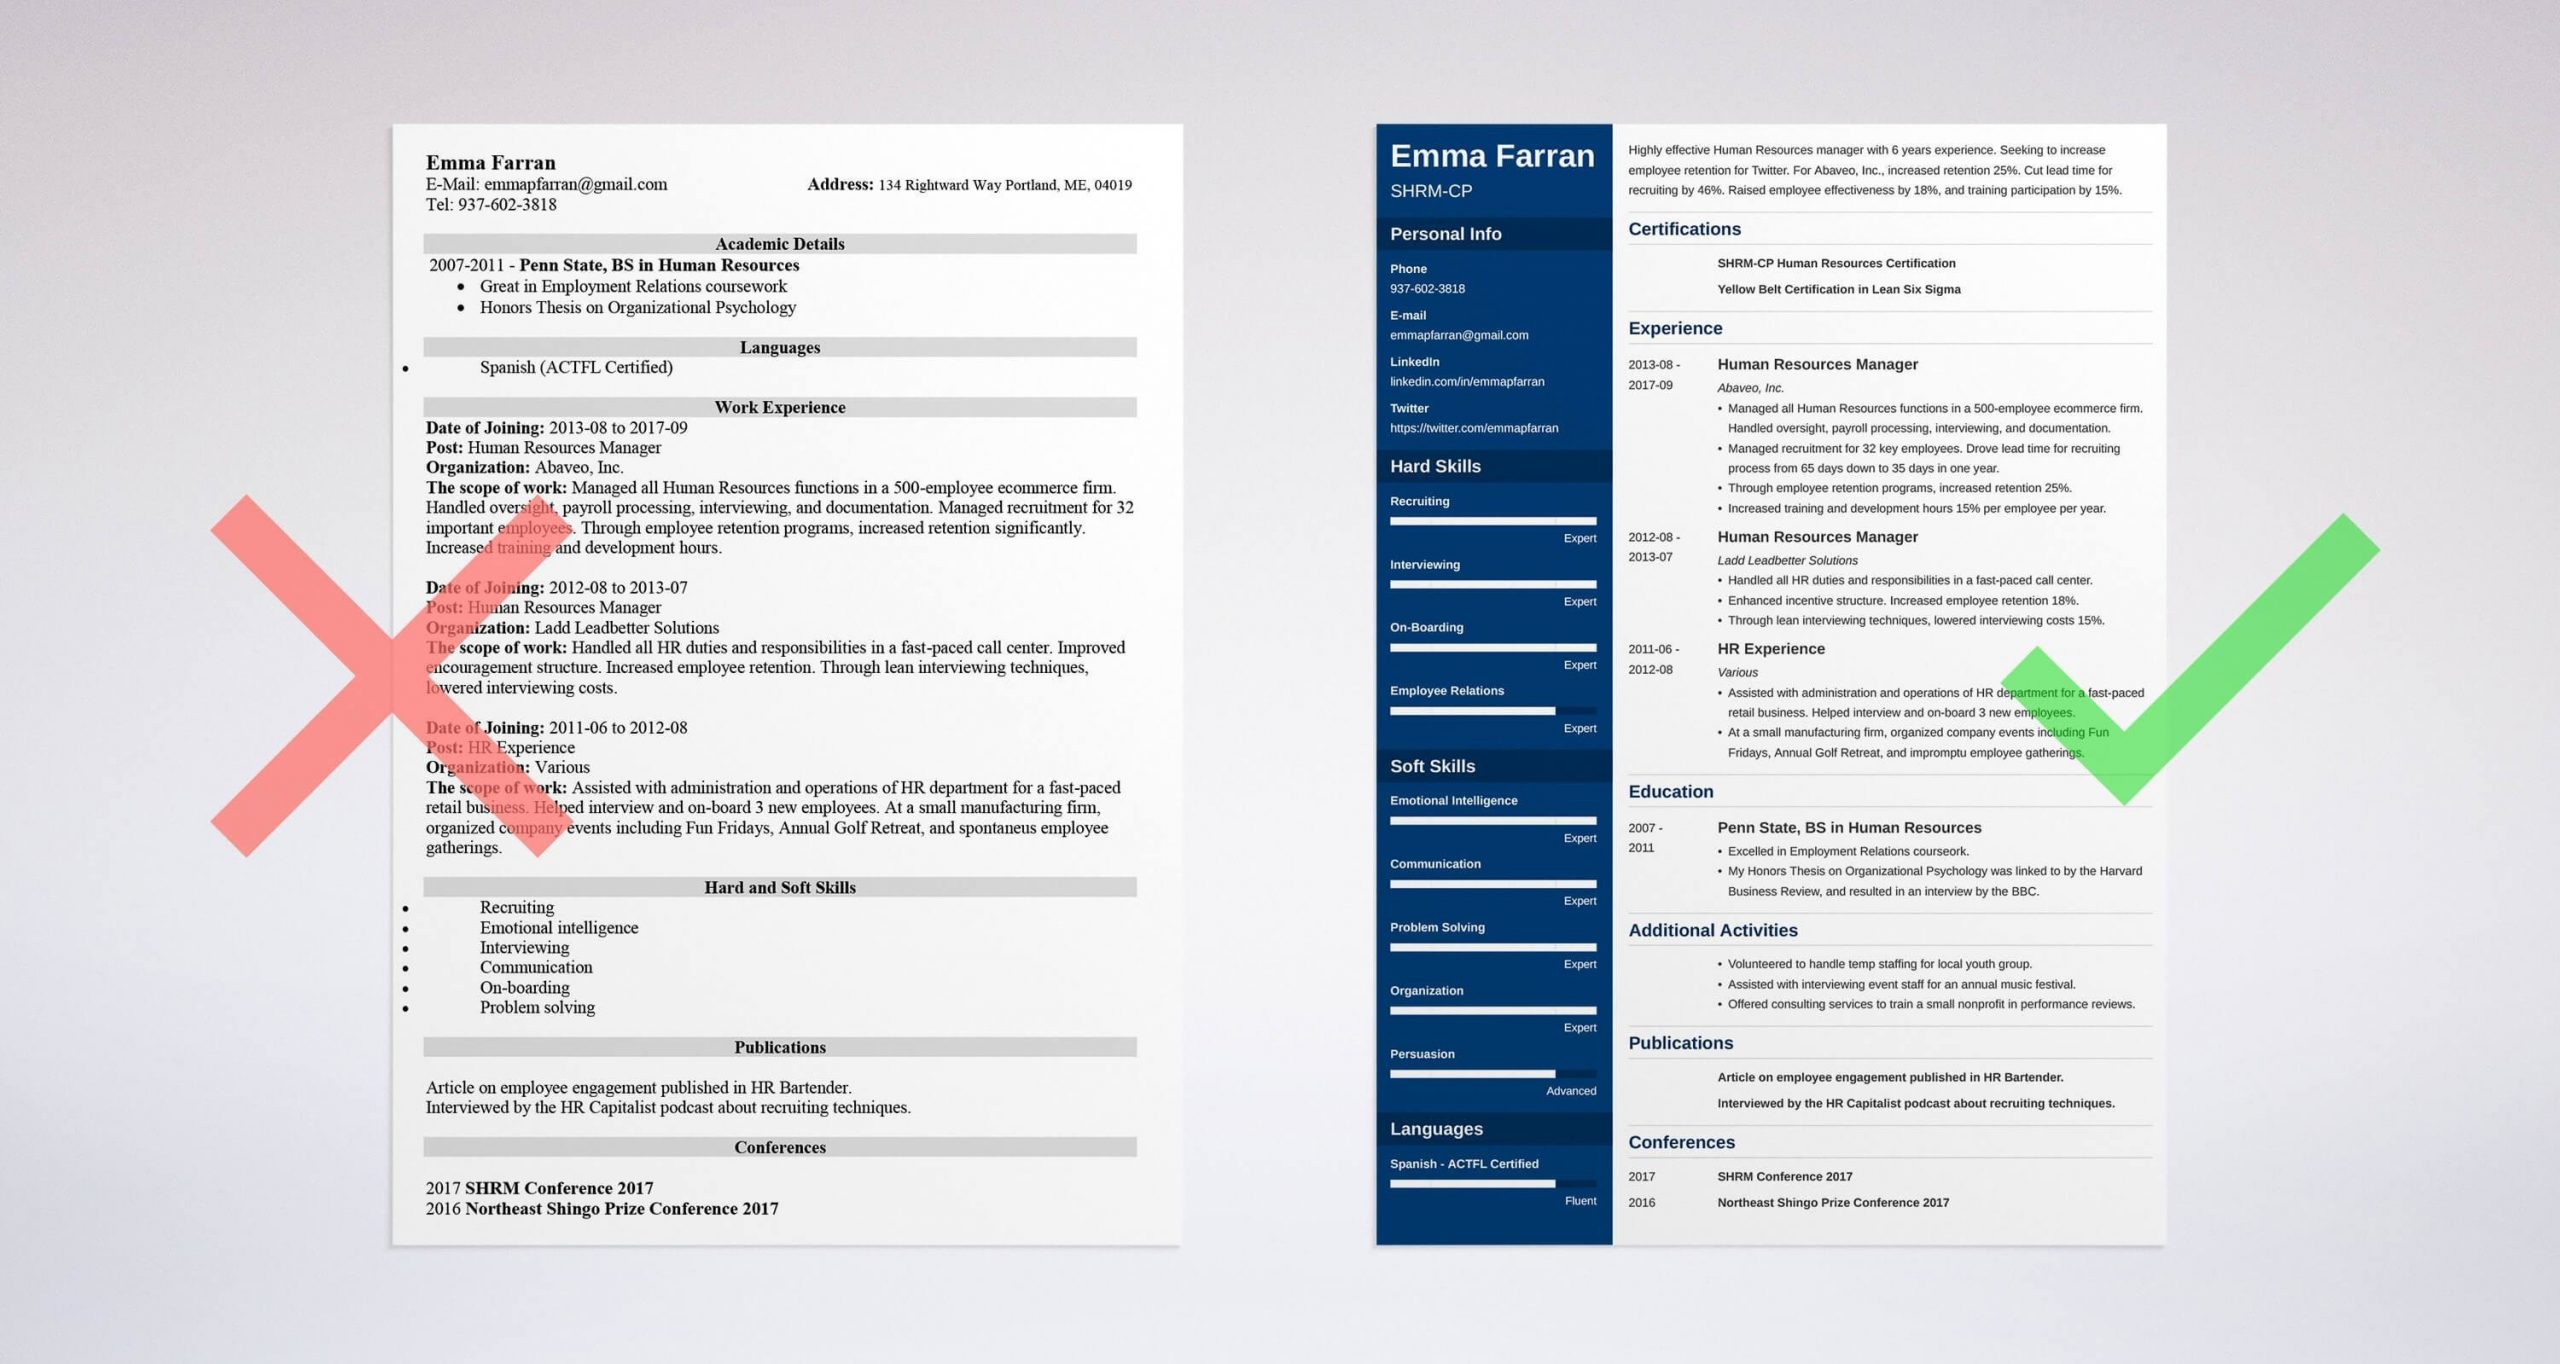 Hr Resume Sample for 4 Years Experience Human Resources (hr) Resume Examples & Guide (lancarrezekiq25 Tips)